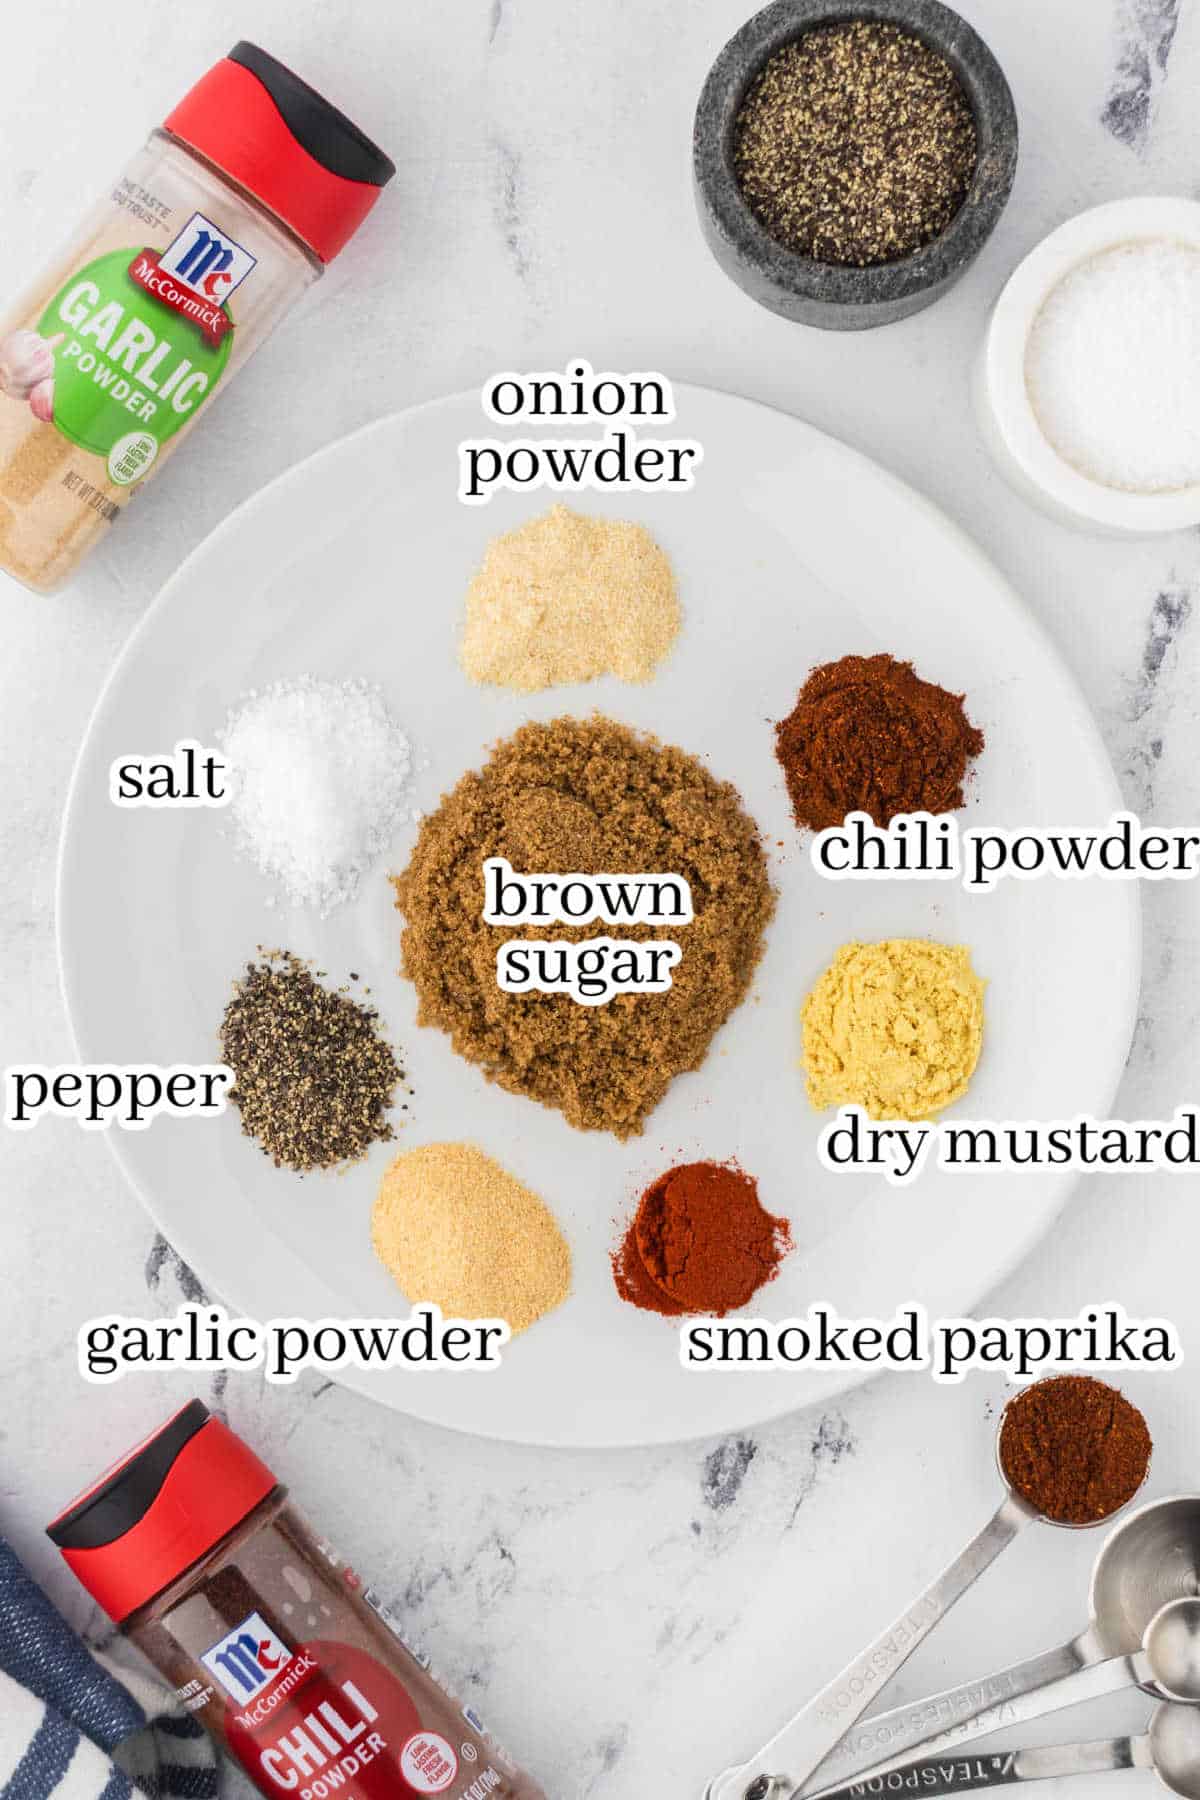 All of the ingredients needed to make the recipe. With print overlay for clarification.